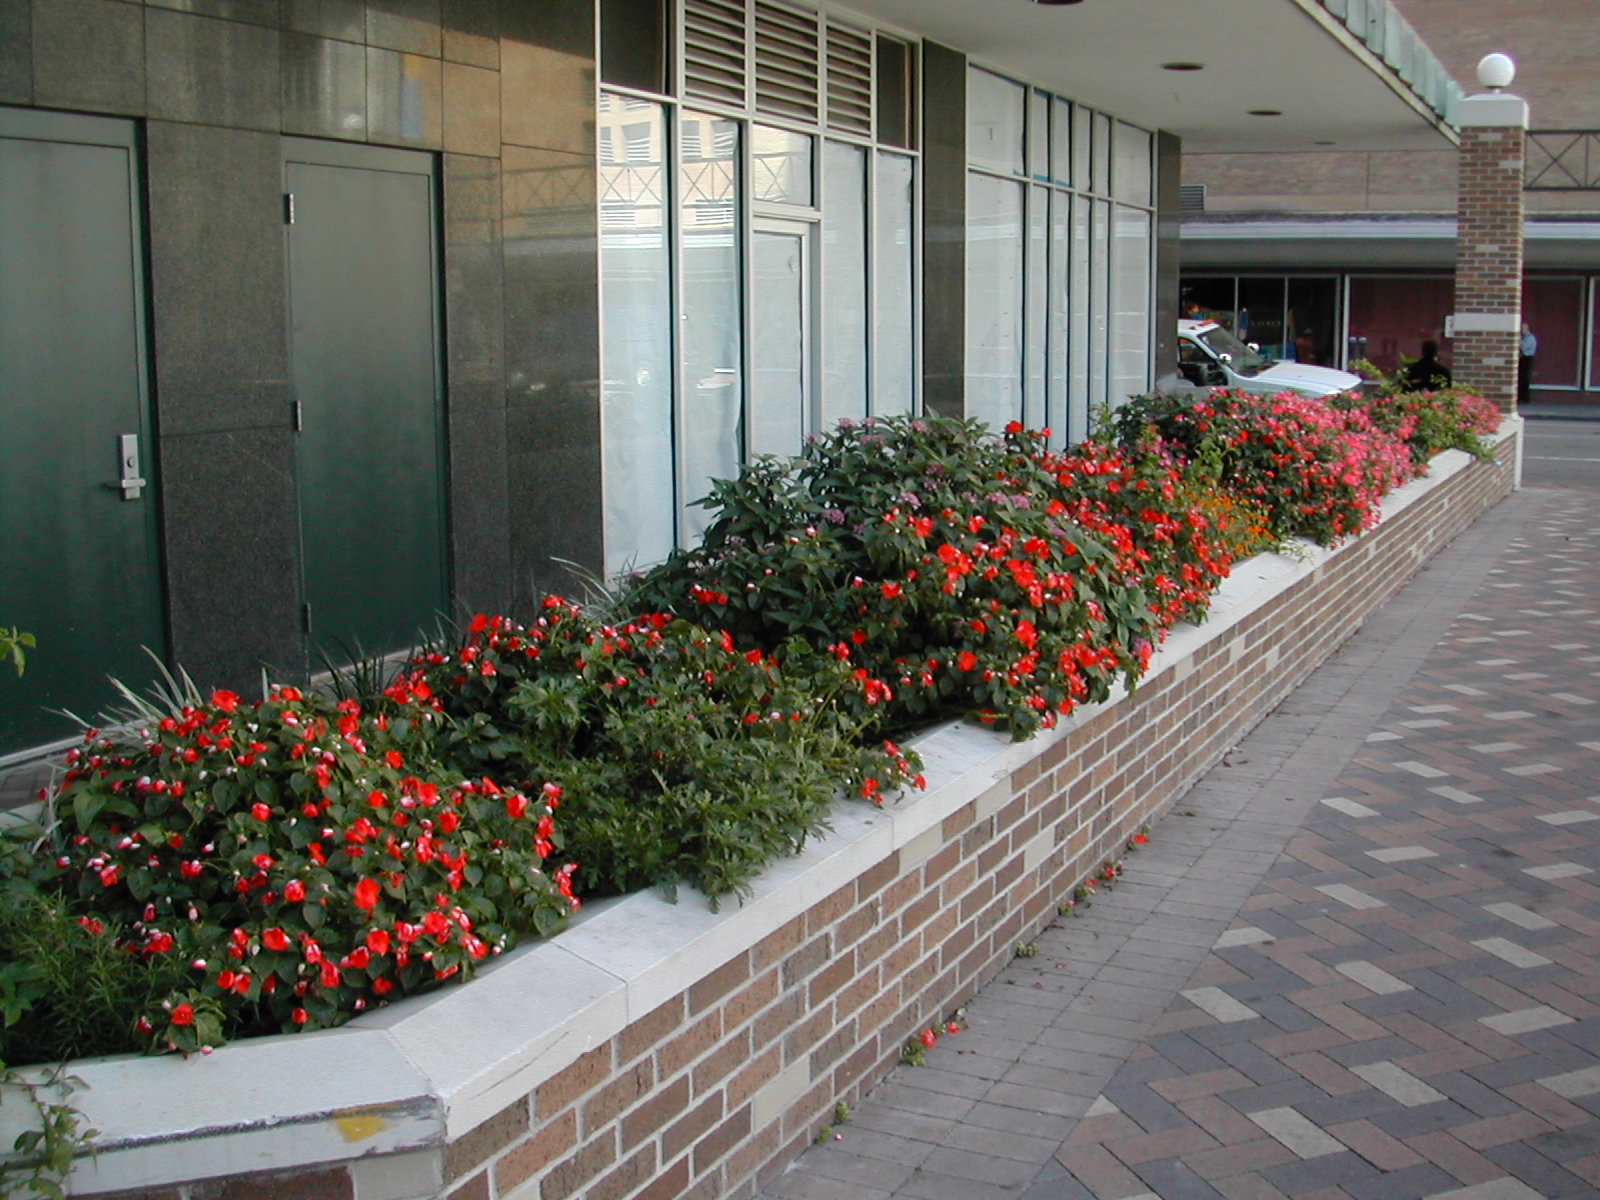 Impatiens grown in 100% perlite subjected to full sunshine until 2 PM everyday!